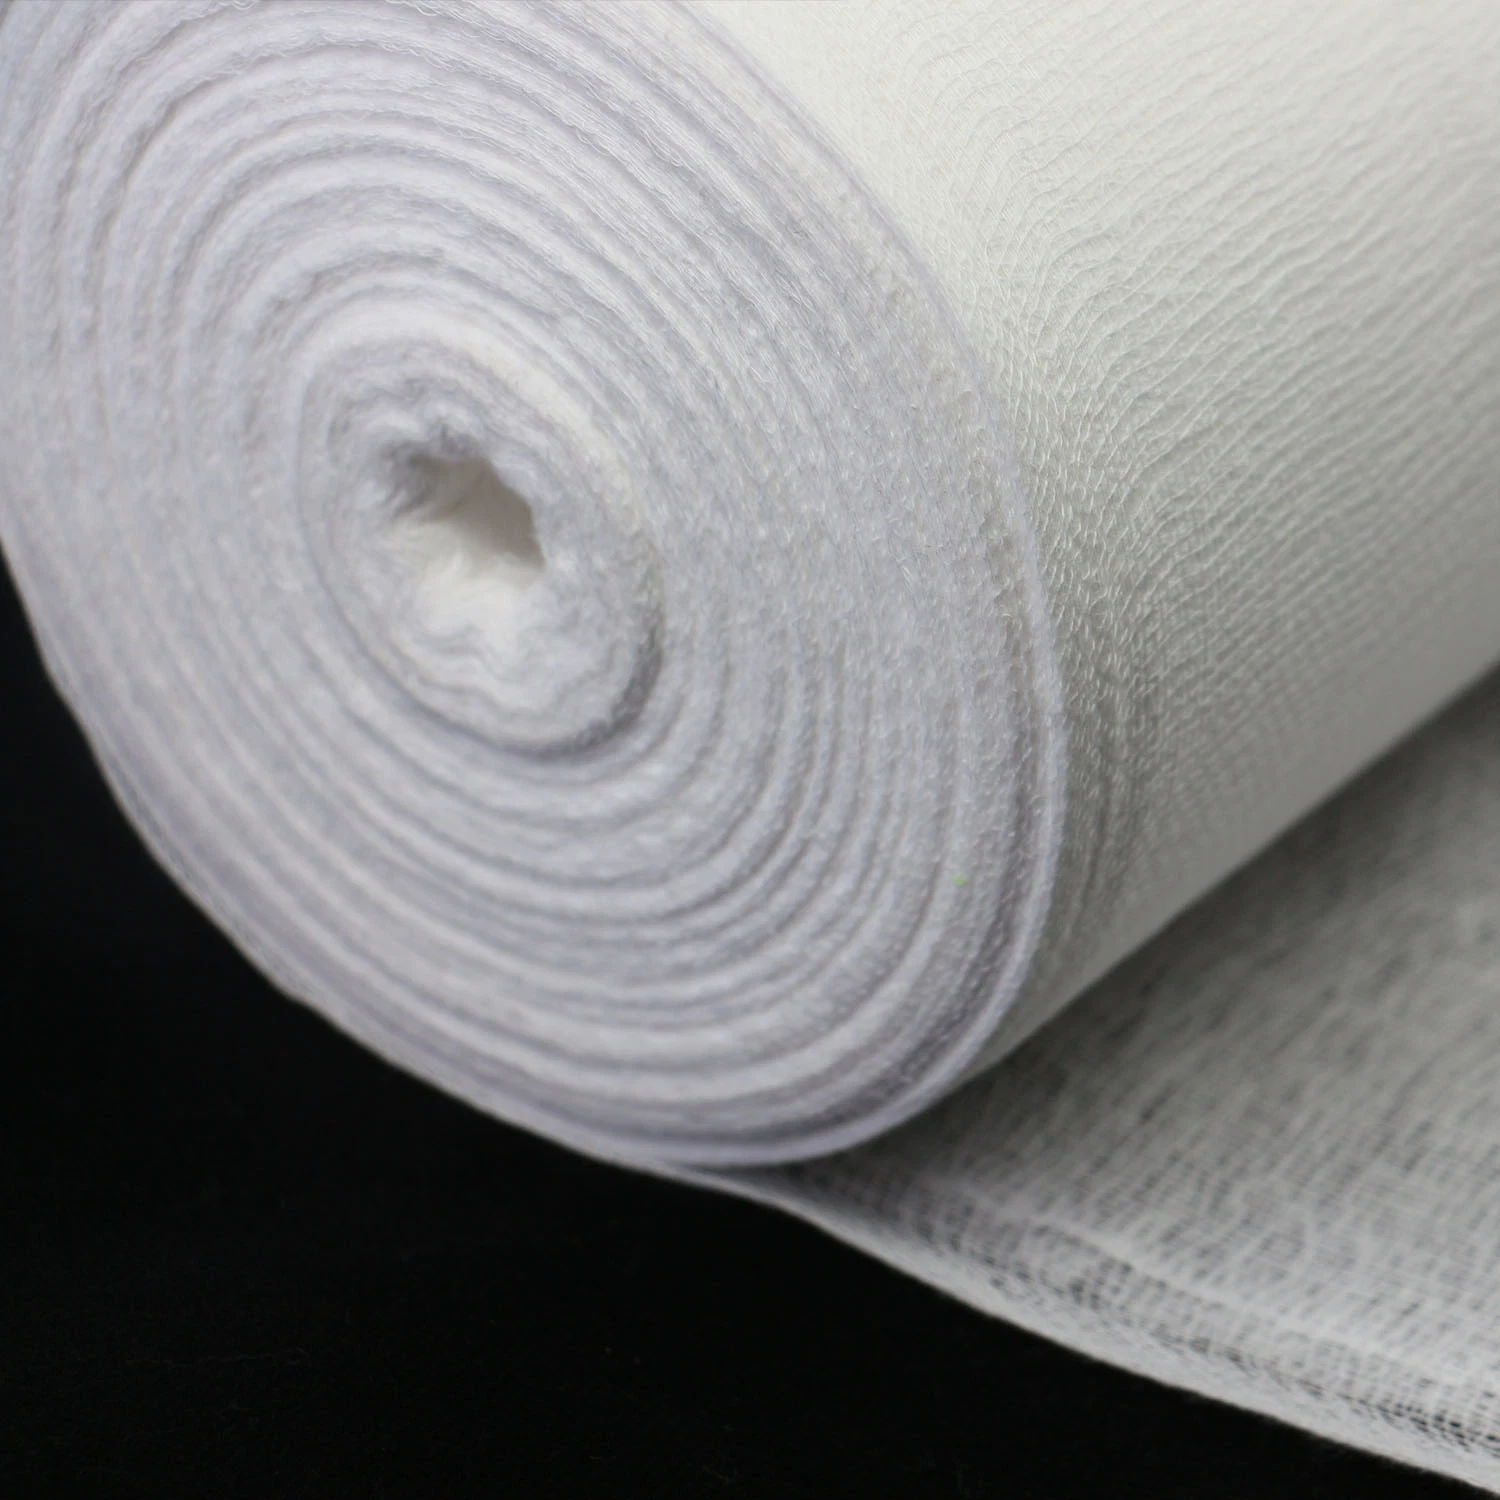 100% Cotton Absorbent Jumbo Gauze Roll 90cm*1000m in 4 Ply for Health & Medical Surgical